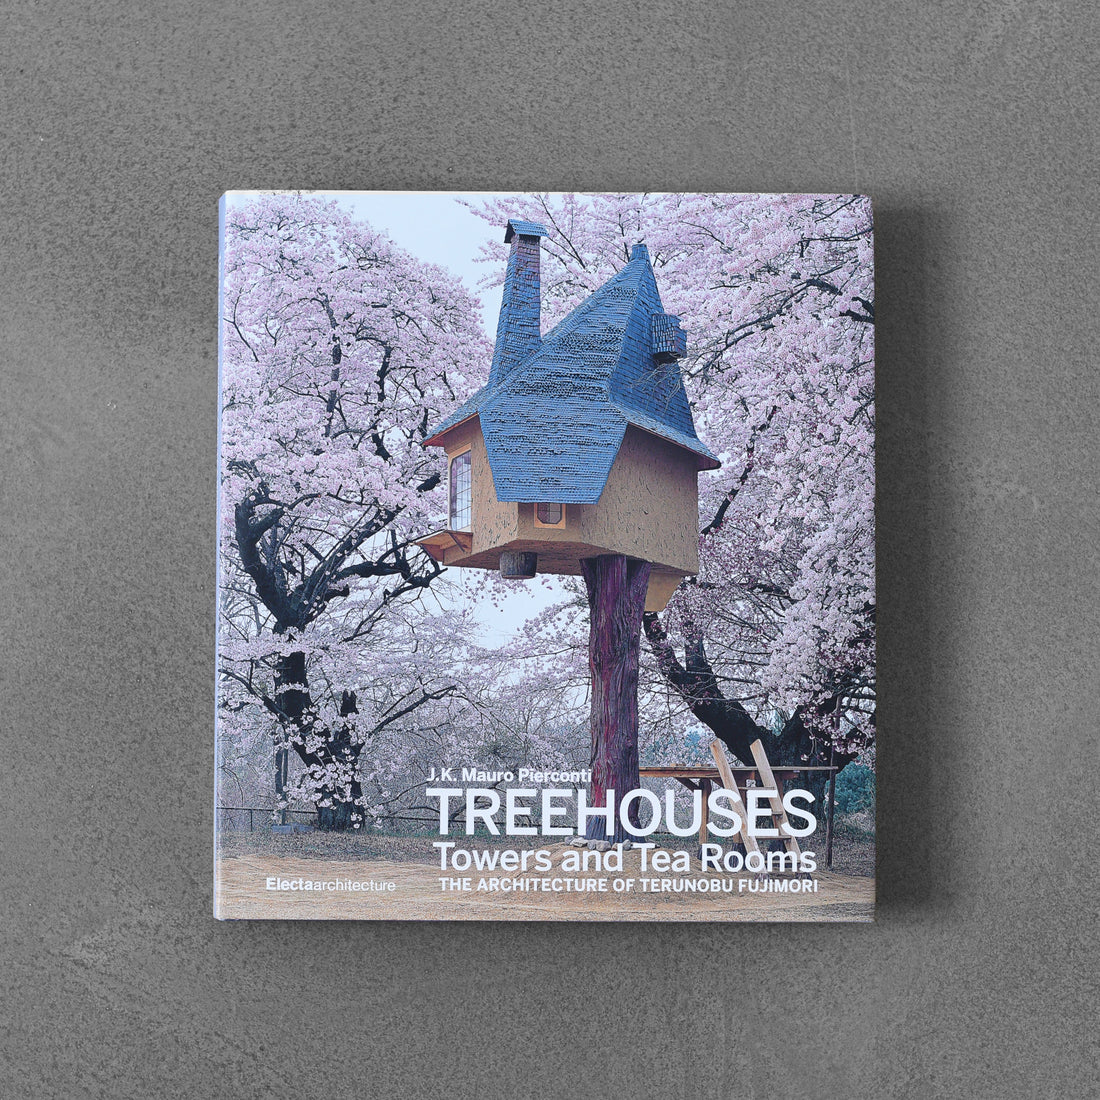 Tree Houses: Towers and Tea Rooms